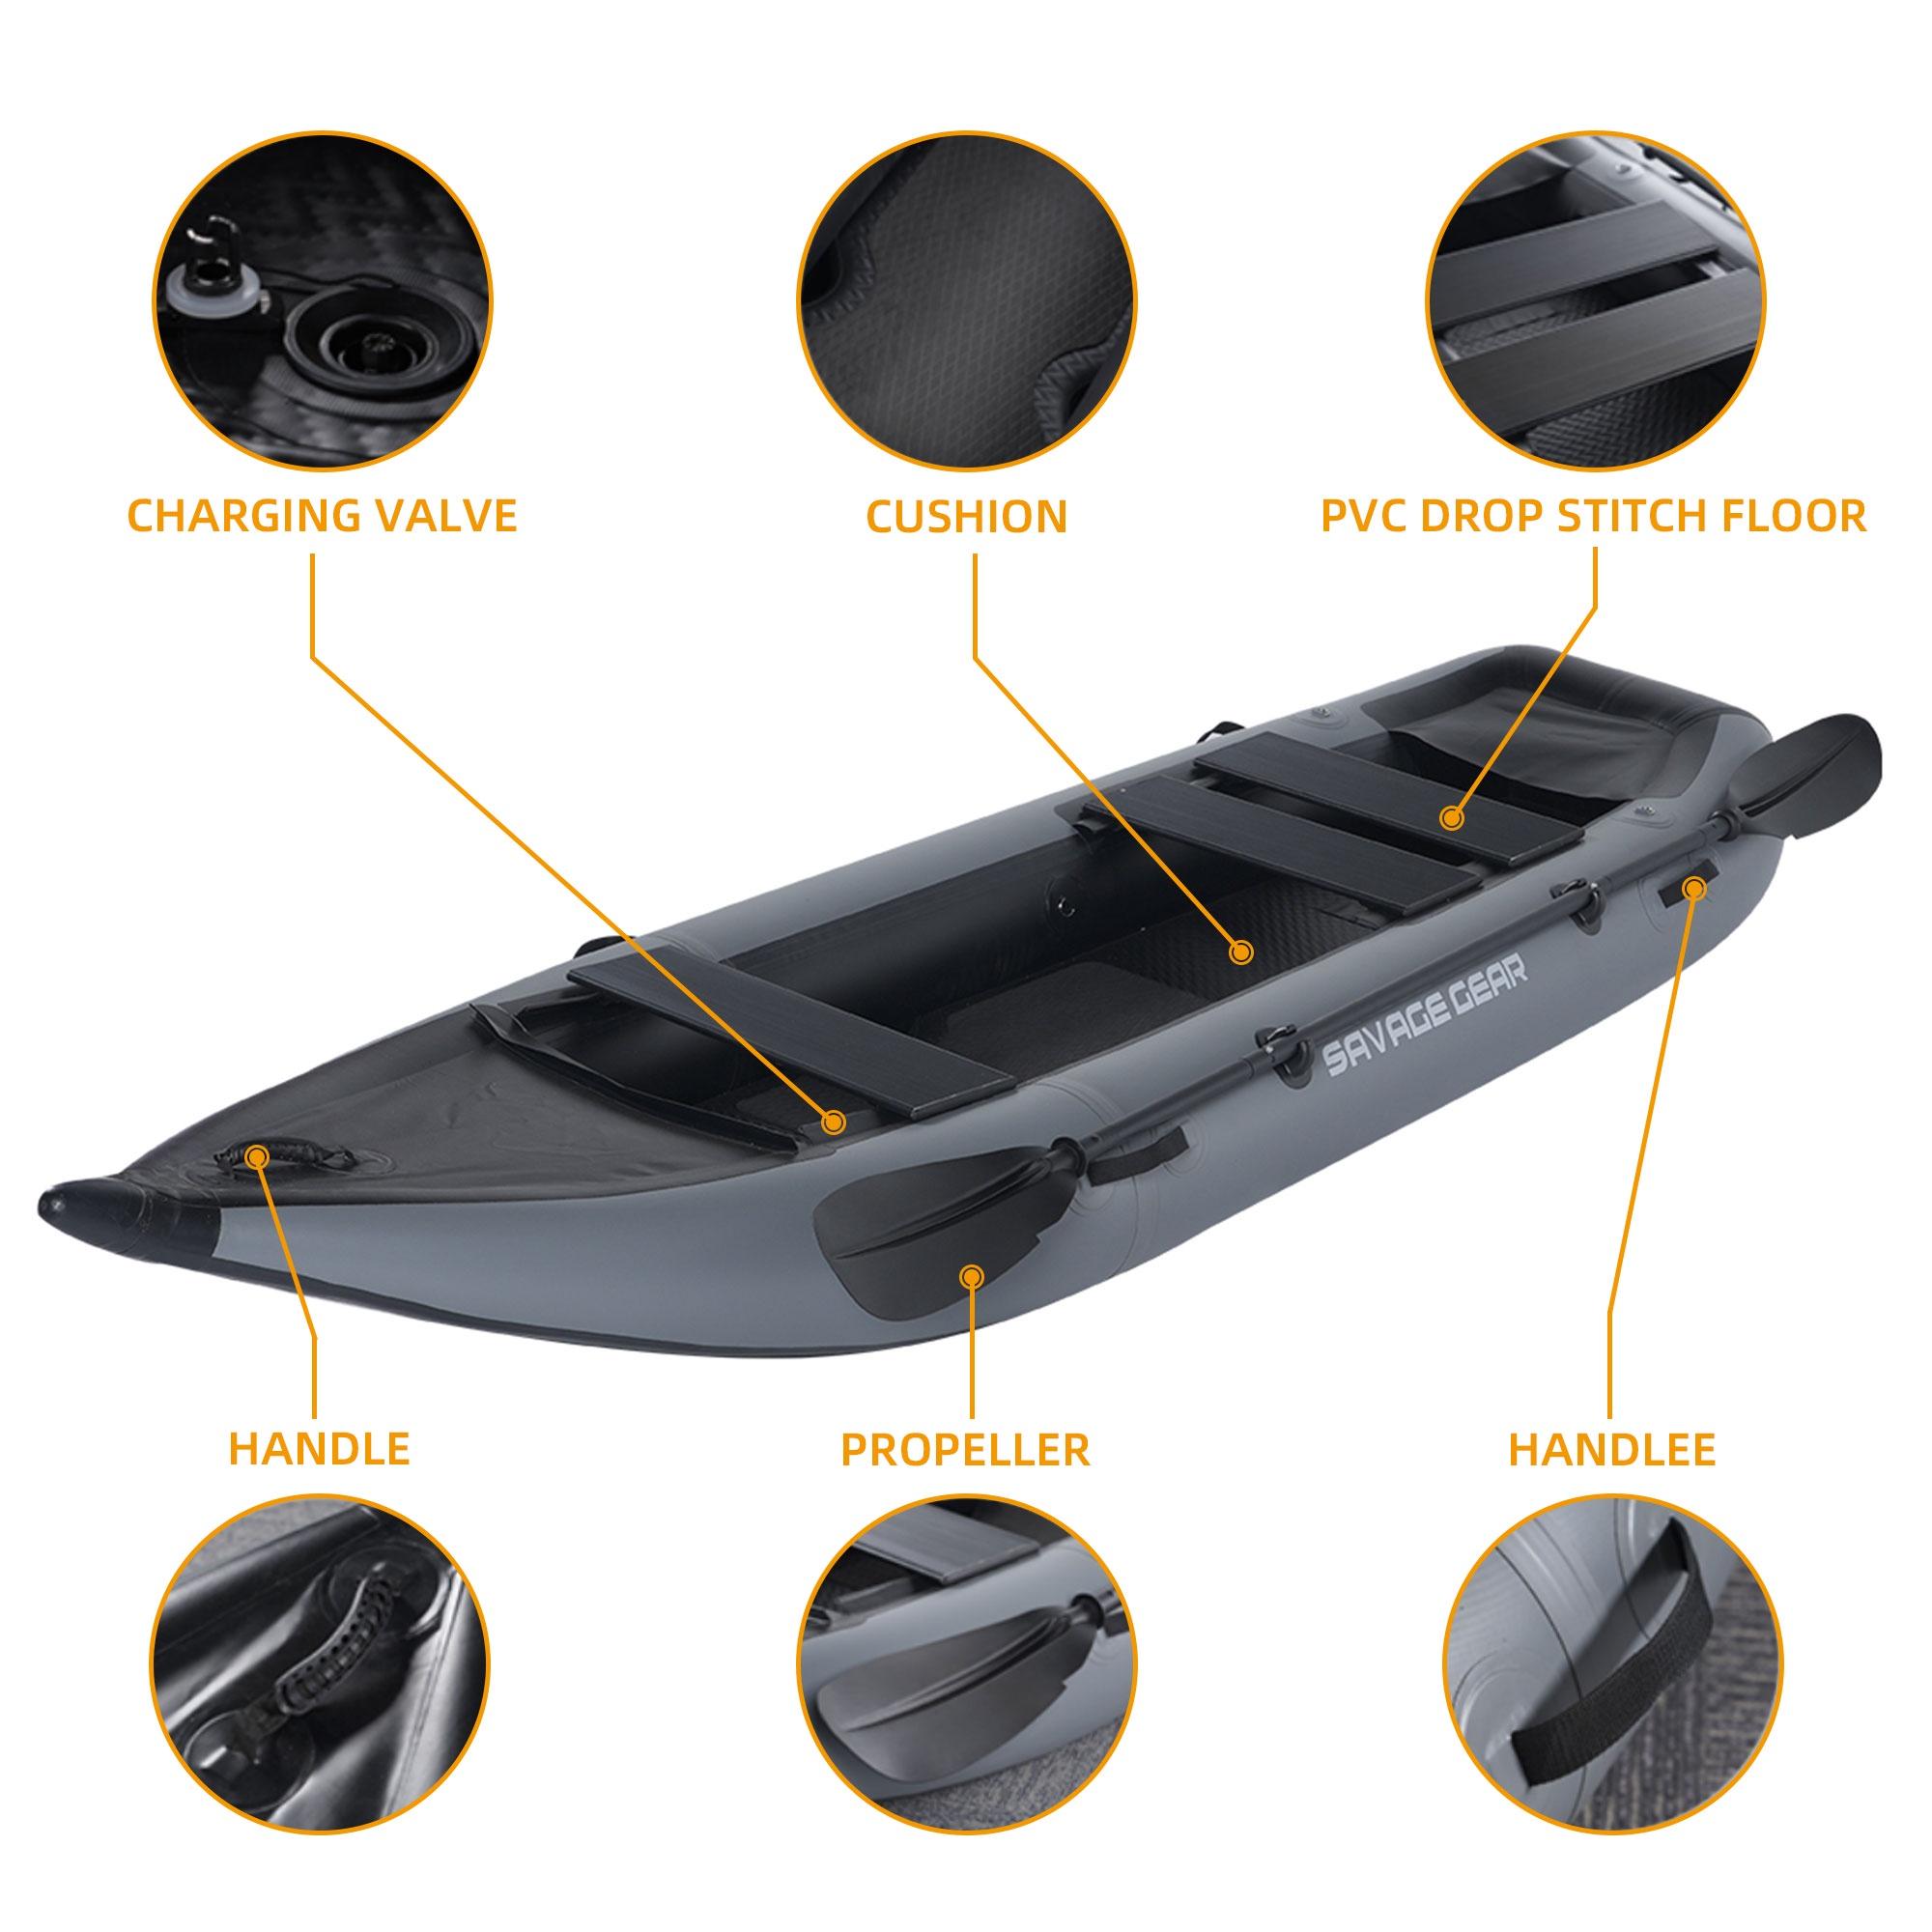 2 Person Inflatable Kayak, Fishing PVC Kayak Boat, Inflatable Boat Rescue Rubber Rowing Boat with Pump, Aluminum Alloy Seat, Paddle, Inflatable Mat, Repair Kit, Fin 440lb Weight Capacity - image 5 of 10